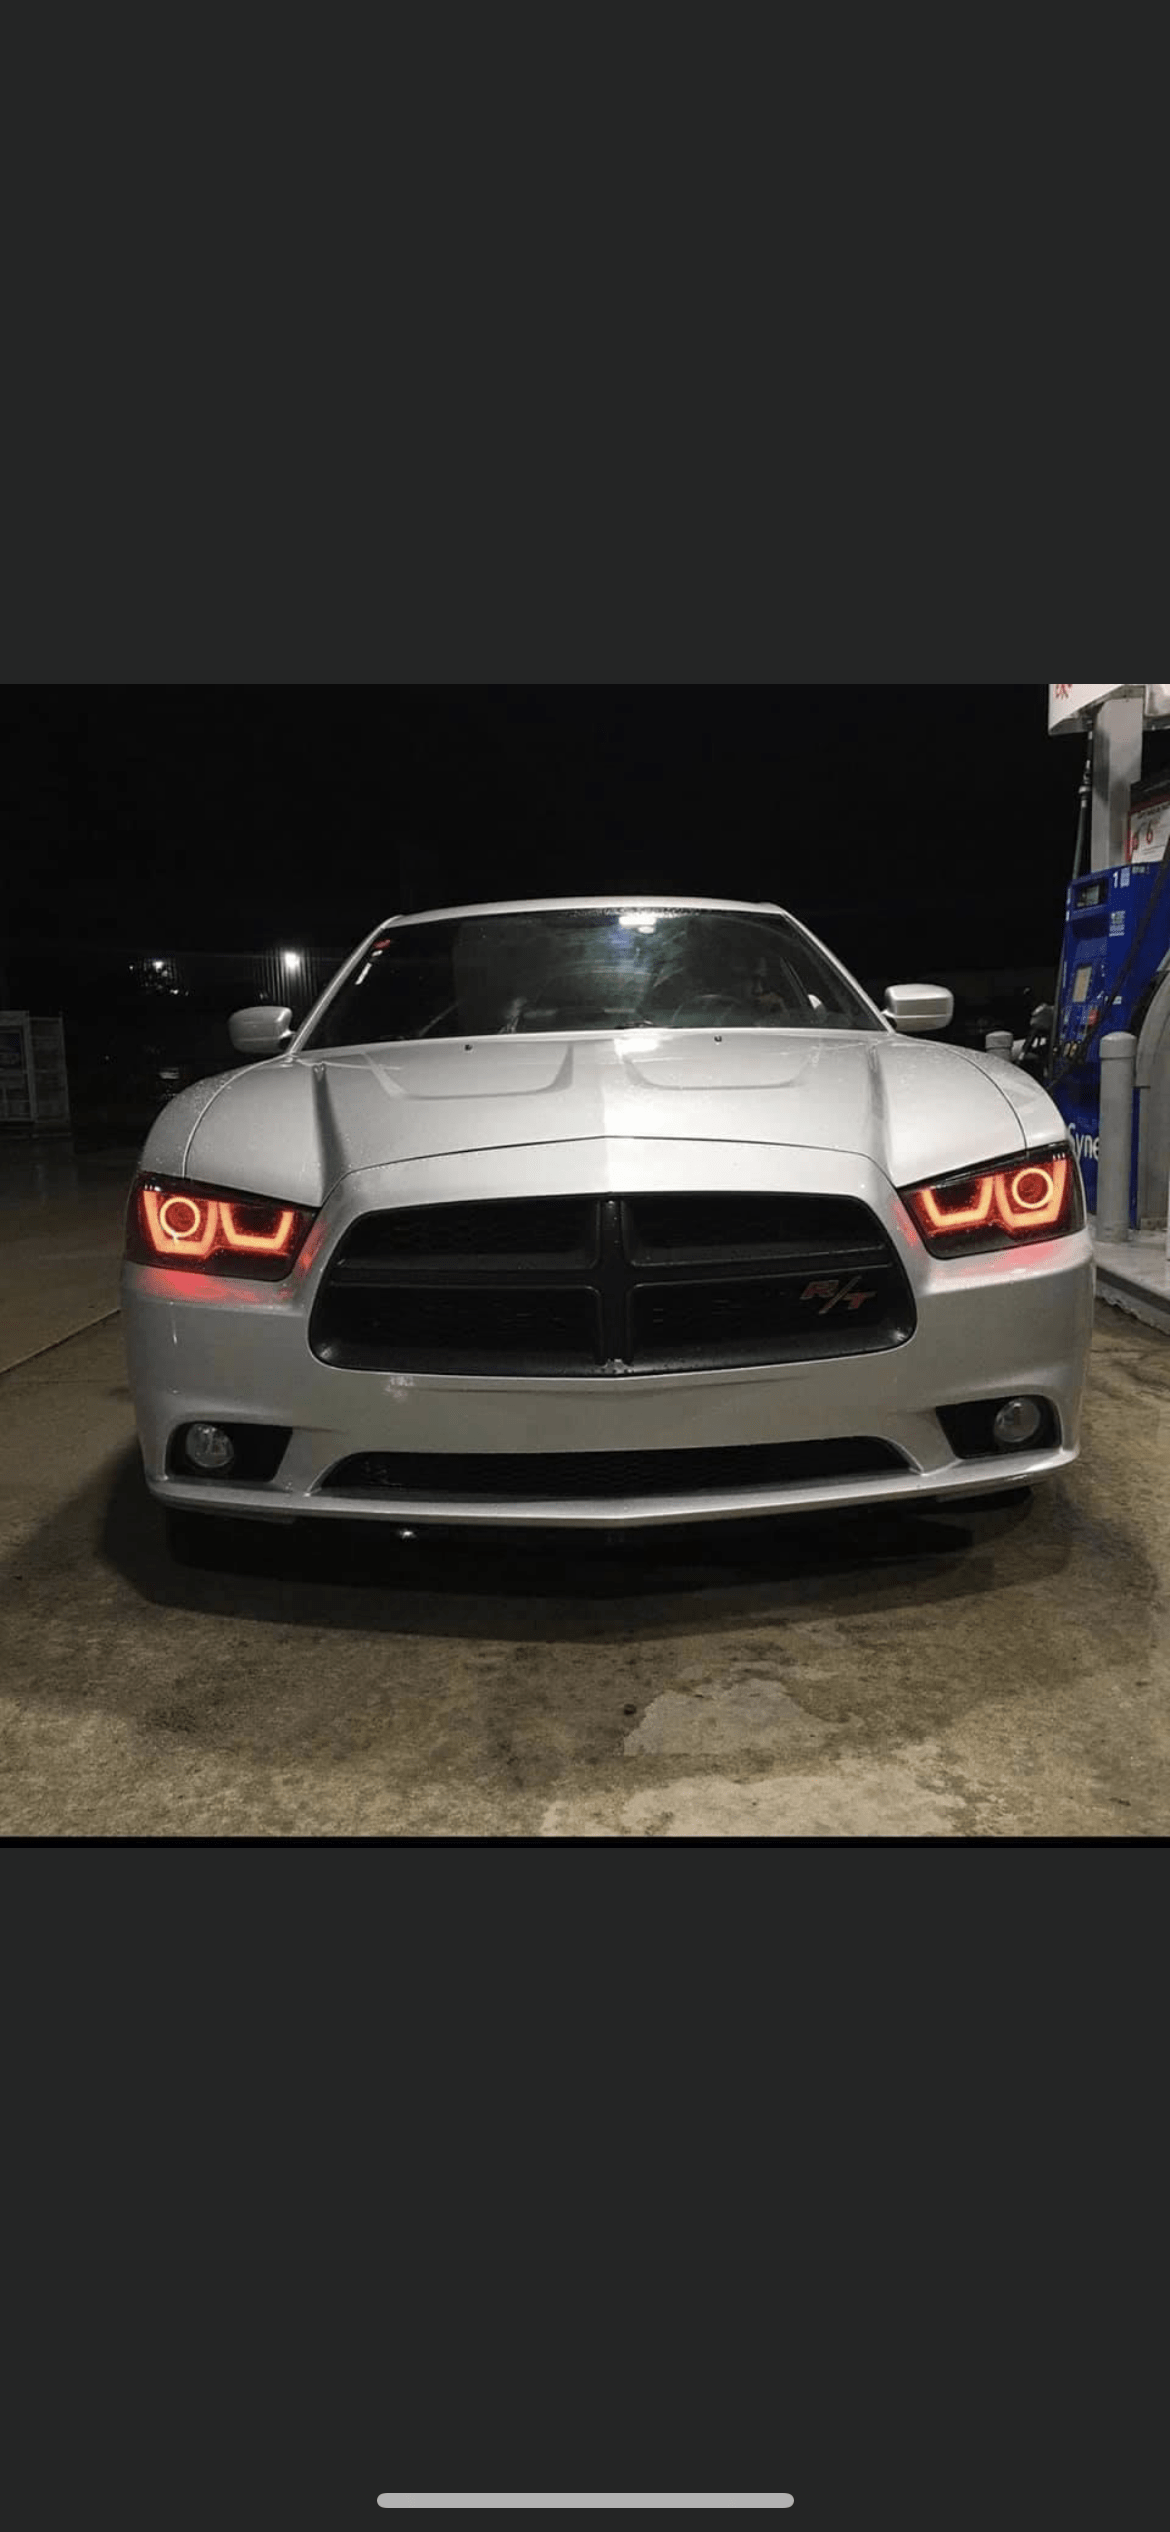 2011-2014 Dodge Charger Flow Series/Color Chasing DRL Boards (for Spec-D Headlights) - RGB Halo Kits Multicolor Flow Series Color Chasing RGBWA LED headlight kit Colorshift Oracle Lighting Trendz OneUpLighting Morimoto theretrofitsource AutoLEDTech Diode Dynamics